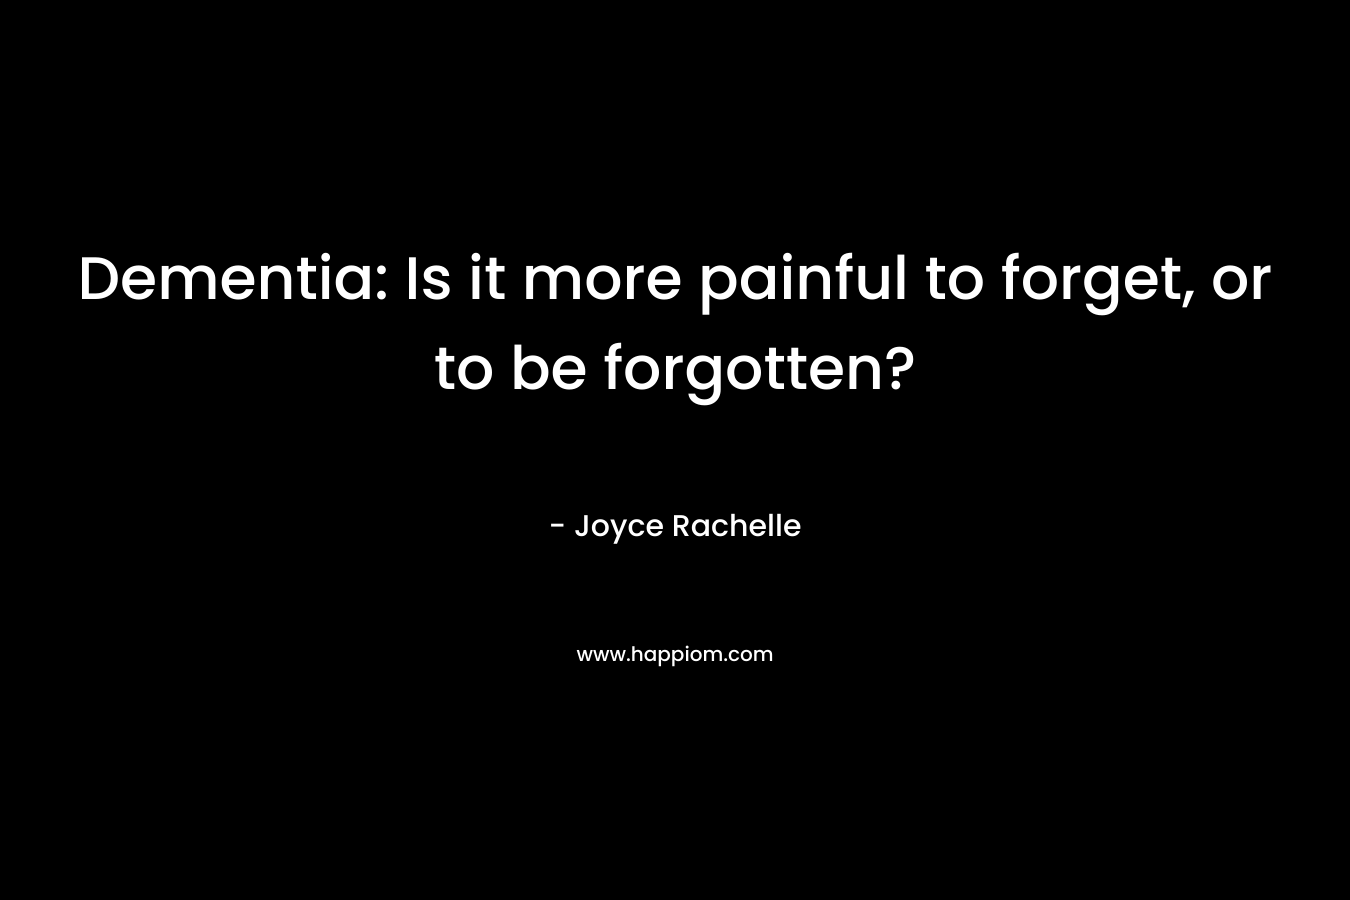 Dementia: Is it more painful to forget, or to be forgotten?